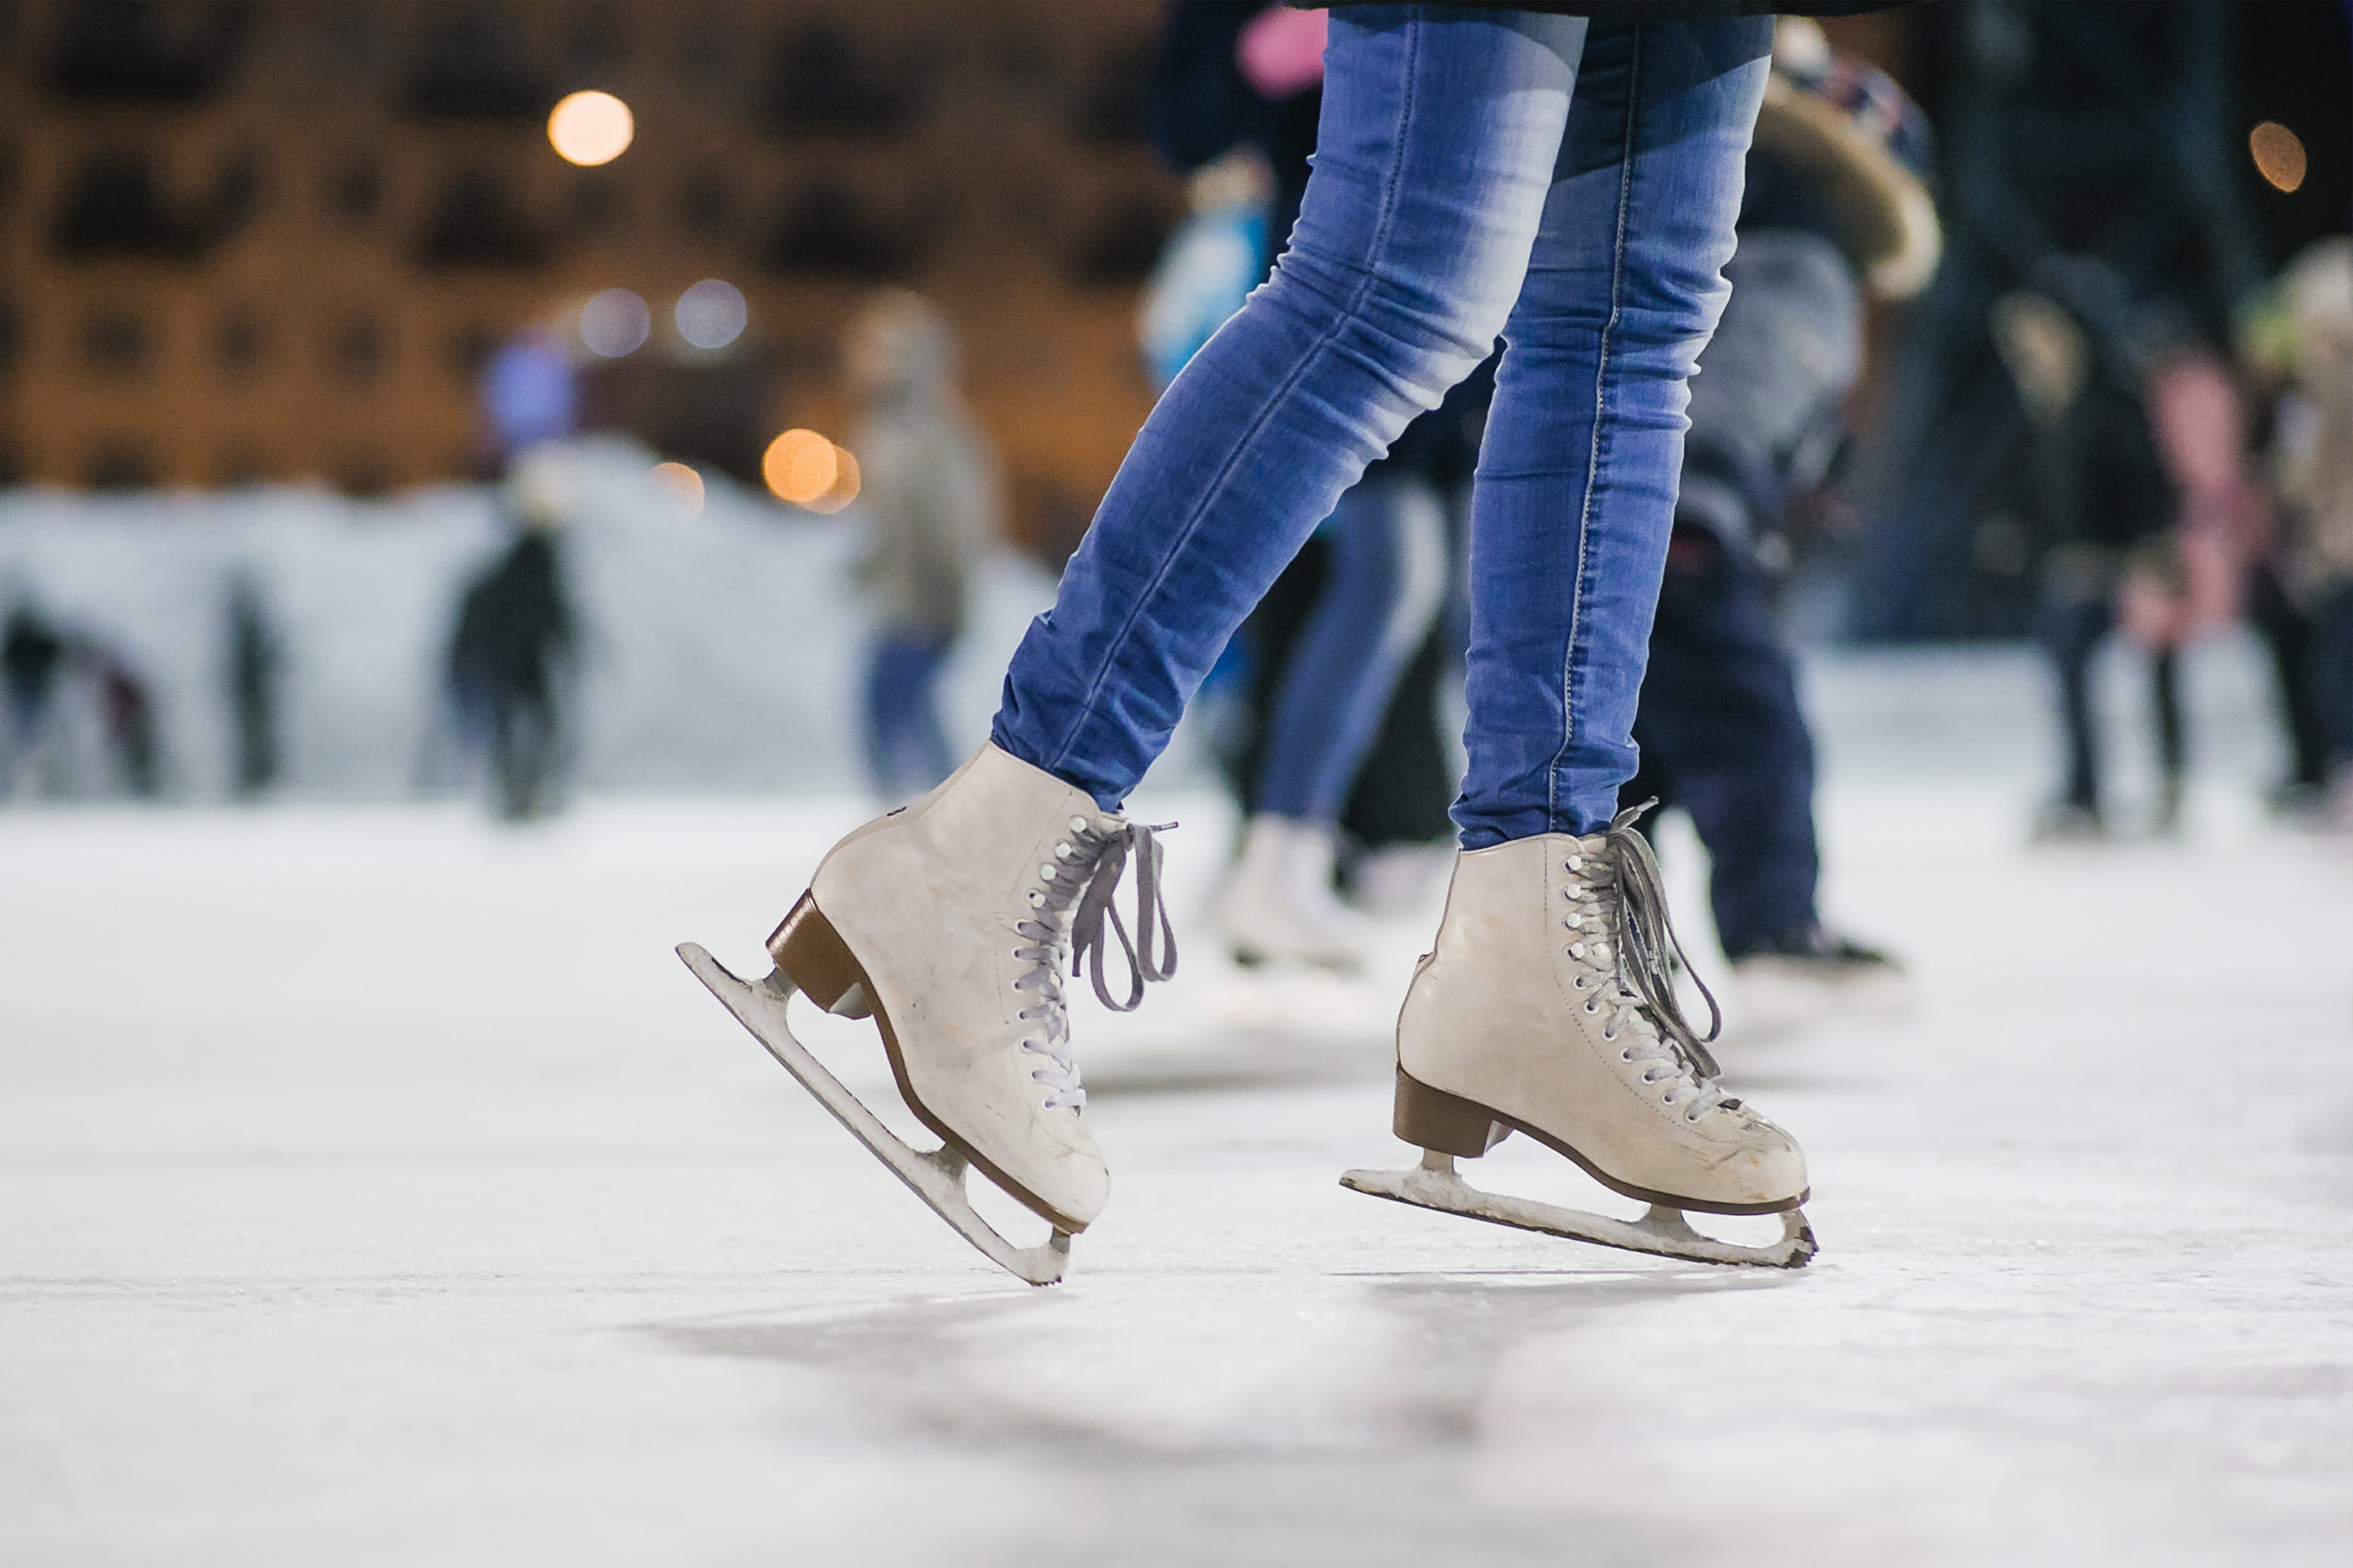 Girl skating on ice shot of her jeans and ice skates